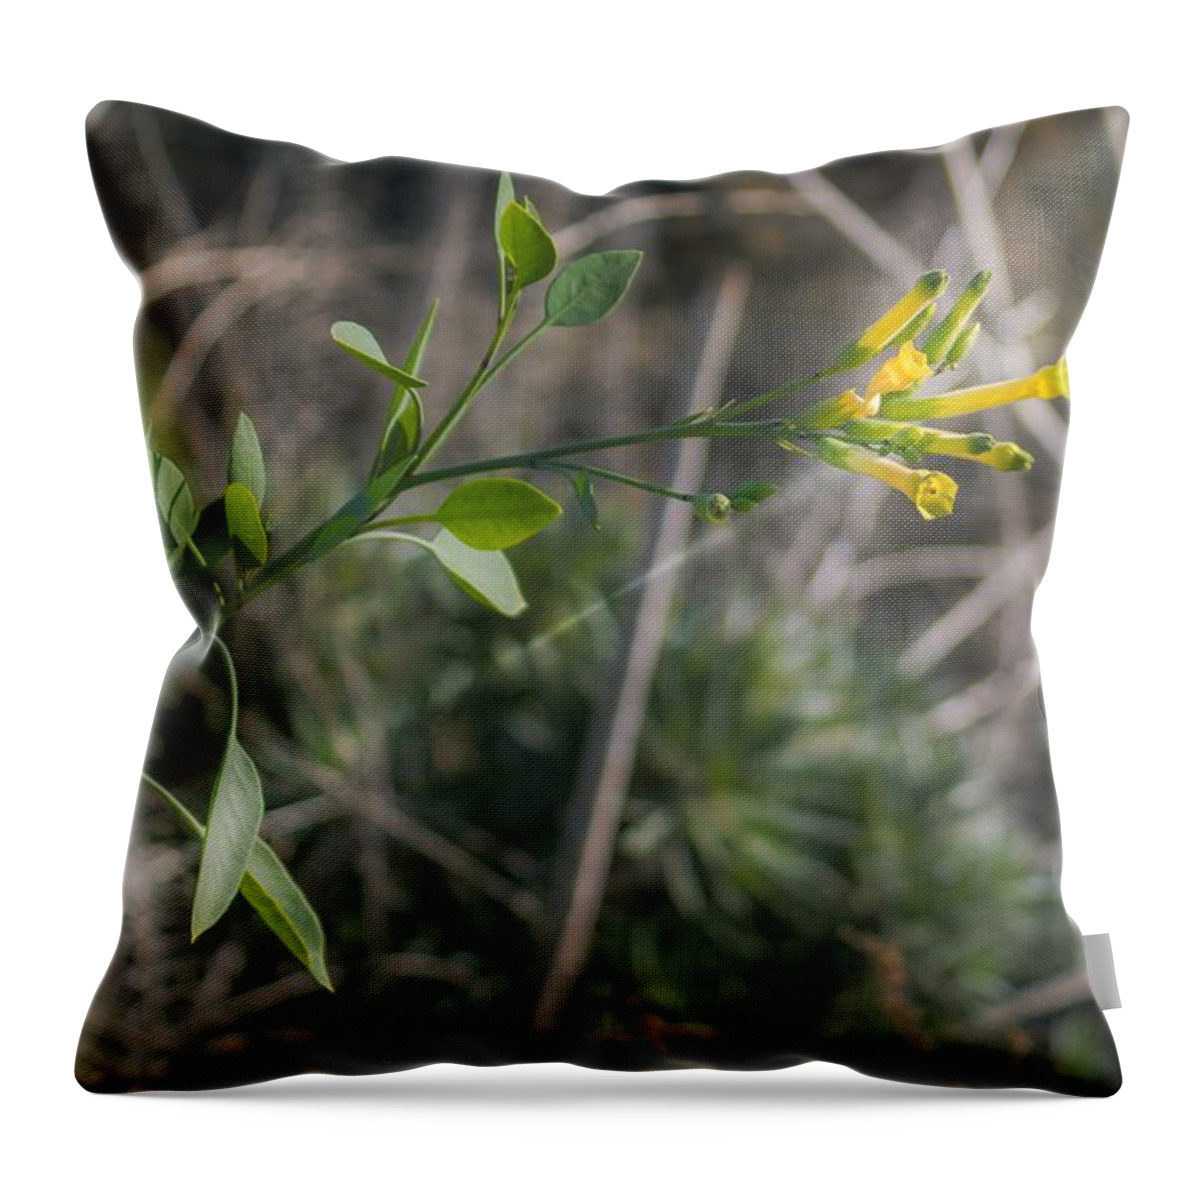 Tree Tobacco Throw Pillow featuring the photograph Tree Tobacco by Alison Frank